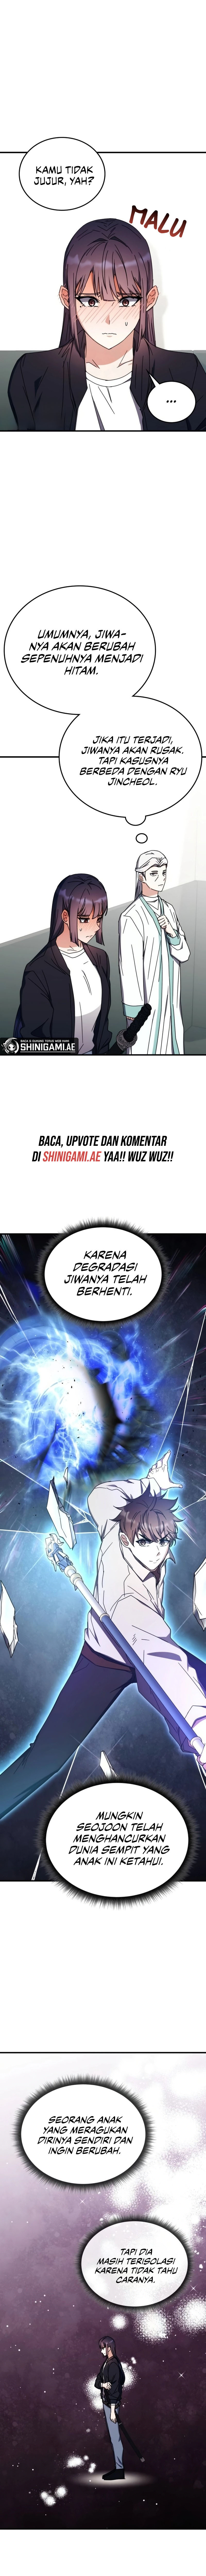 transcension-academy Chapter 99